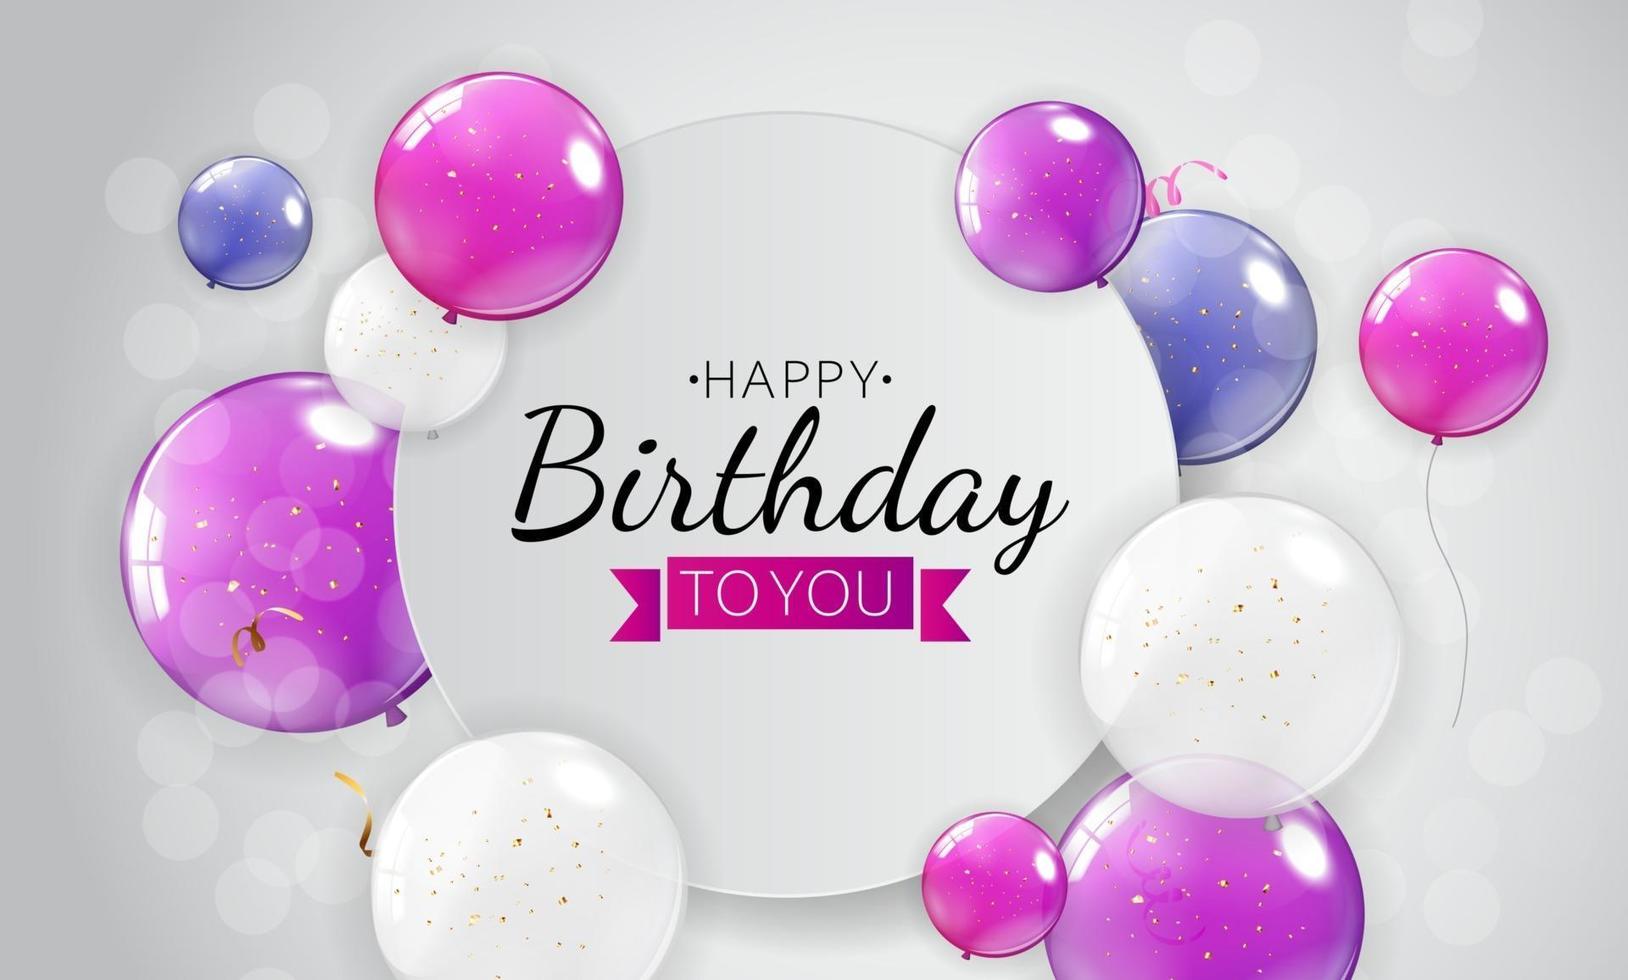 Happy Birthday Background with Balloons vector